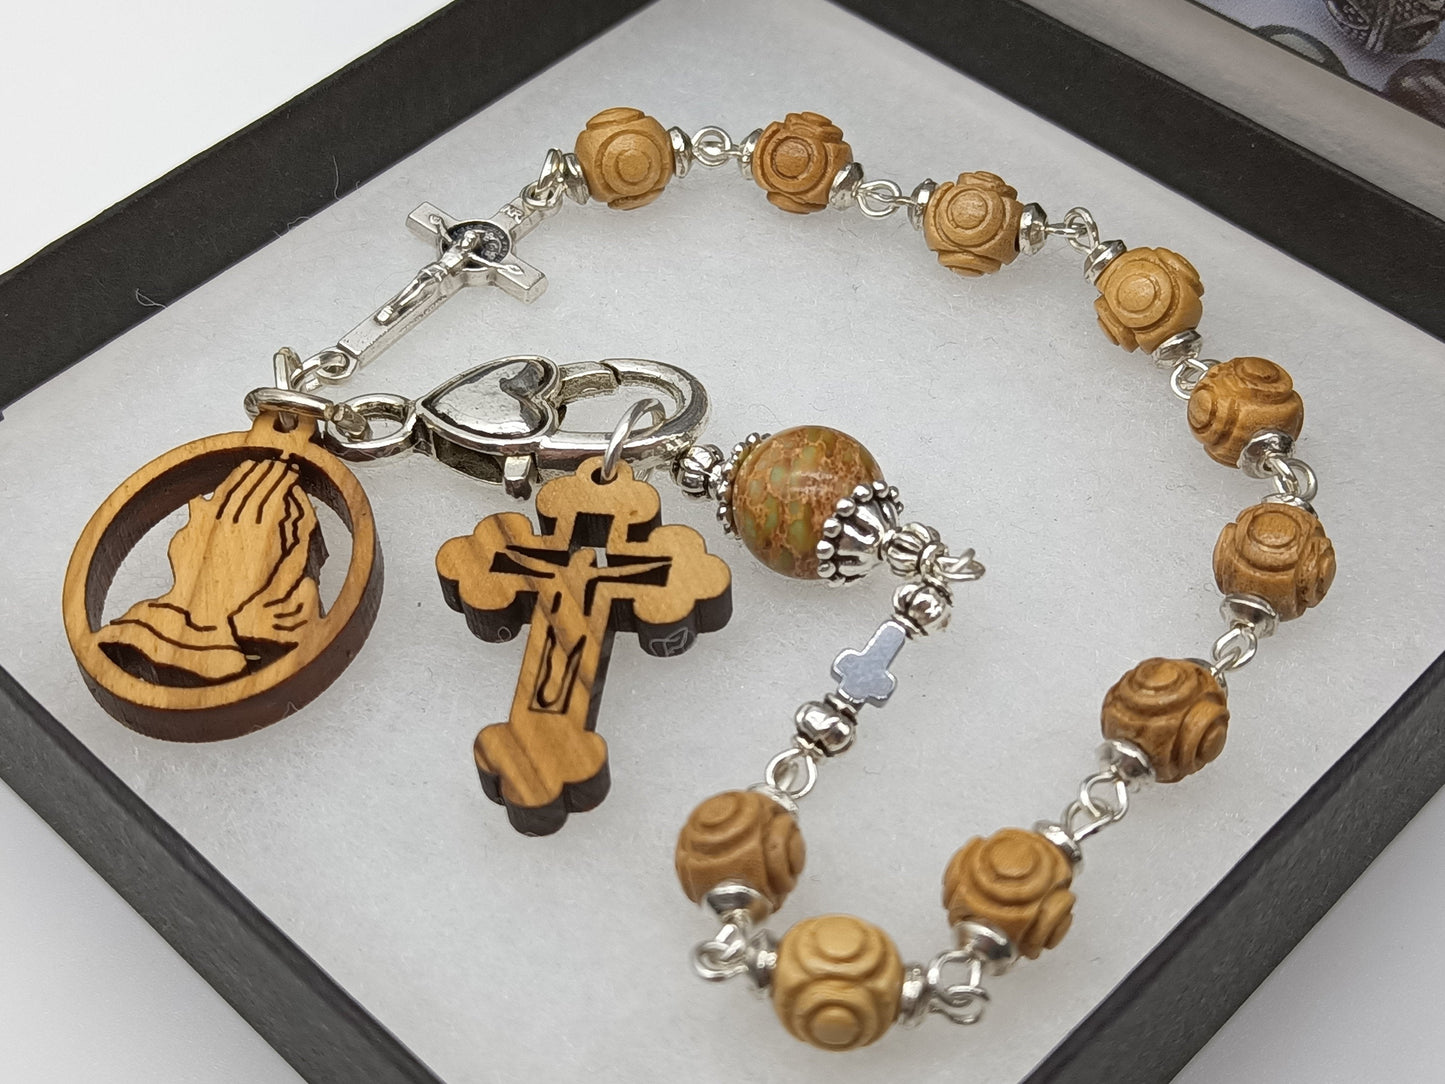 Praying Hands from the Holy Land wooden single decade rosary, Men's Rosary, gemstone rosary beads, pilgrims prayer beads, Communion gift.